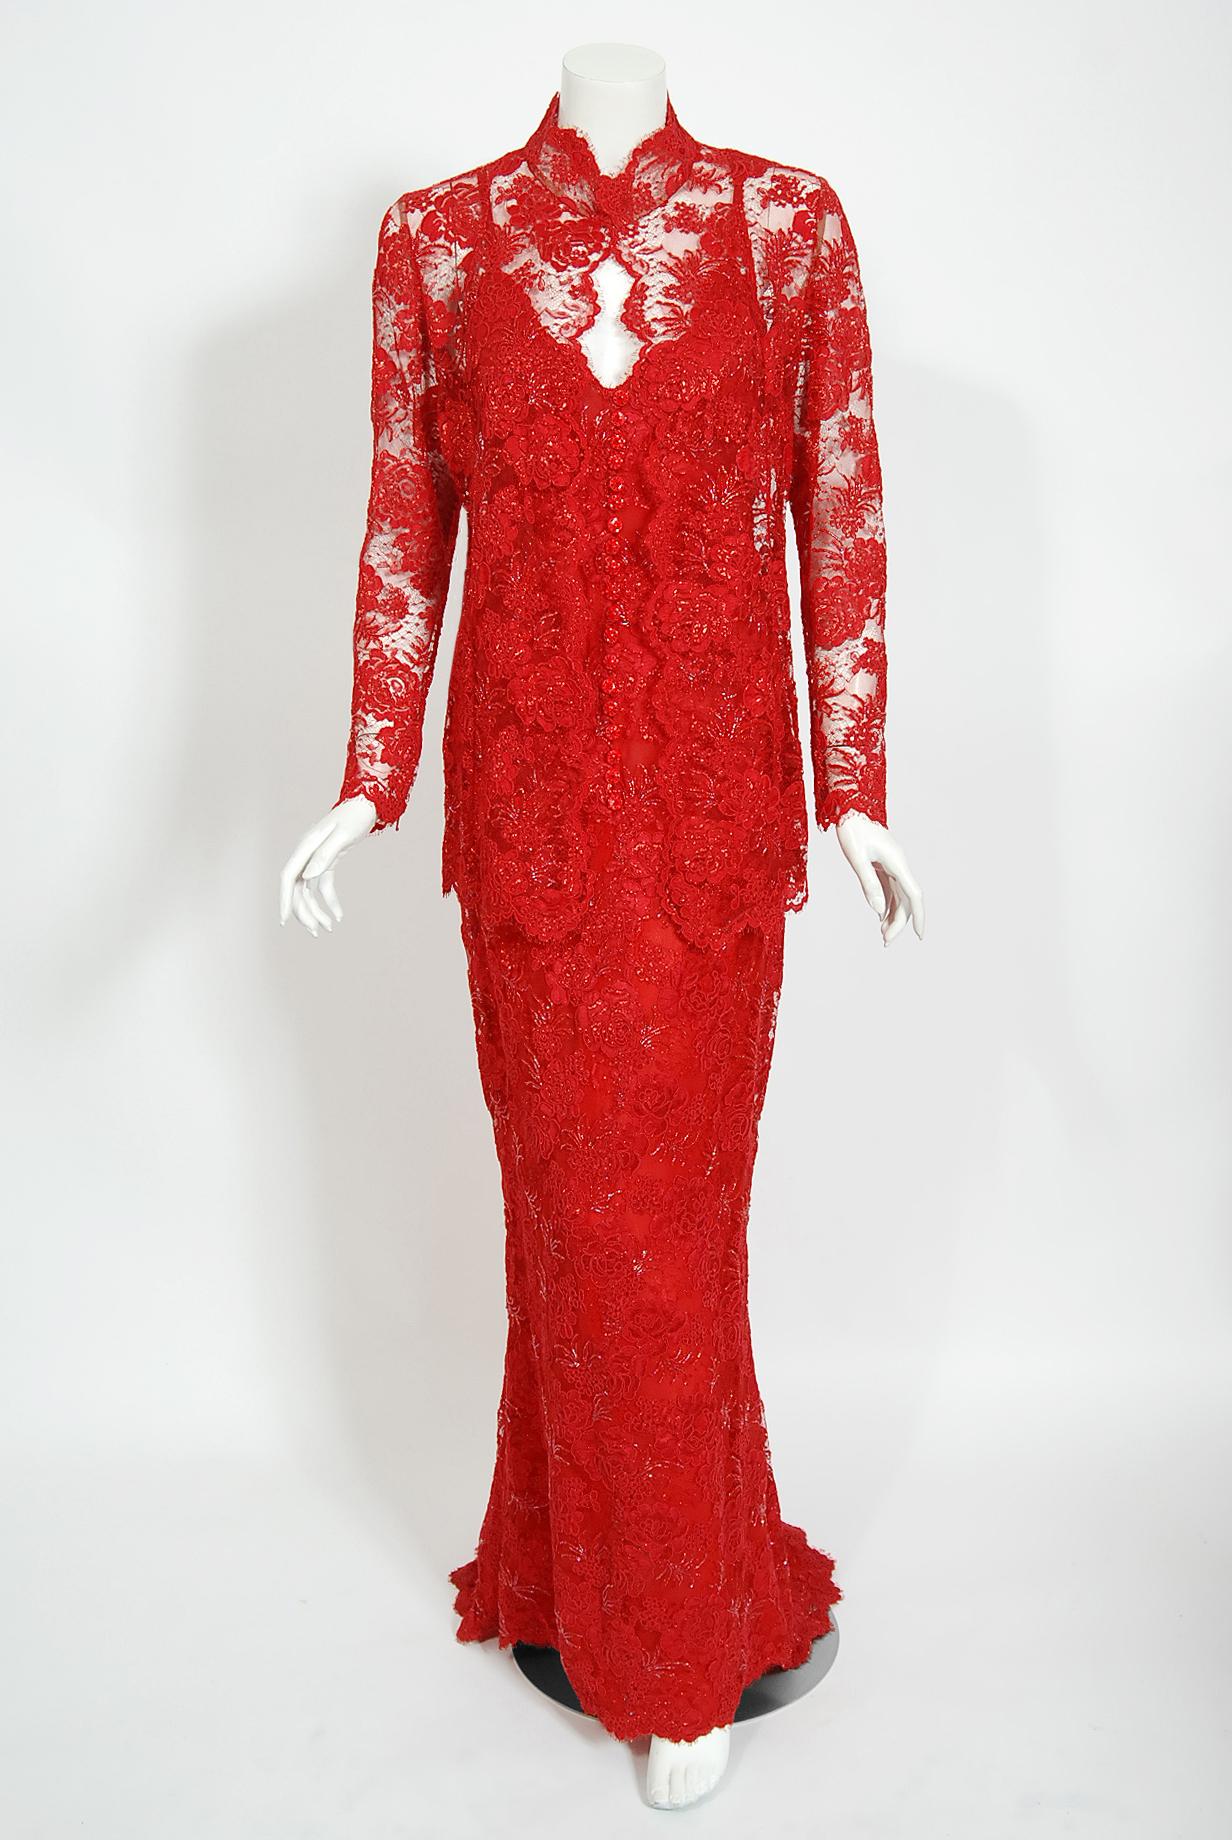 Vintage 1996 Ungaro Haute Couture Red Beaded Floral Lace Hourglass Gown & Jacket 2